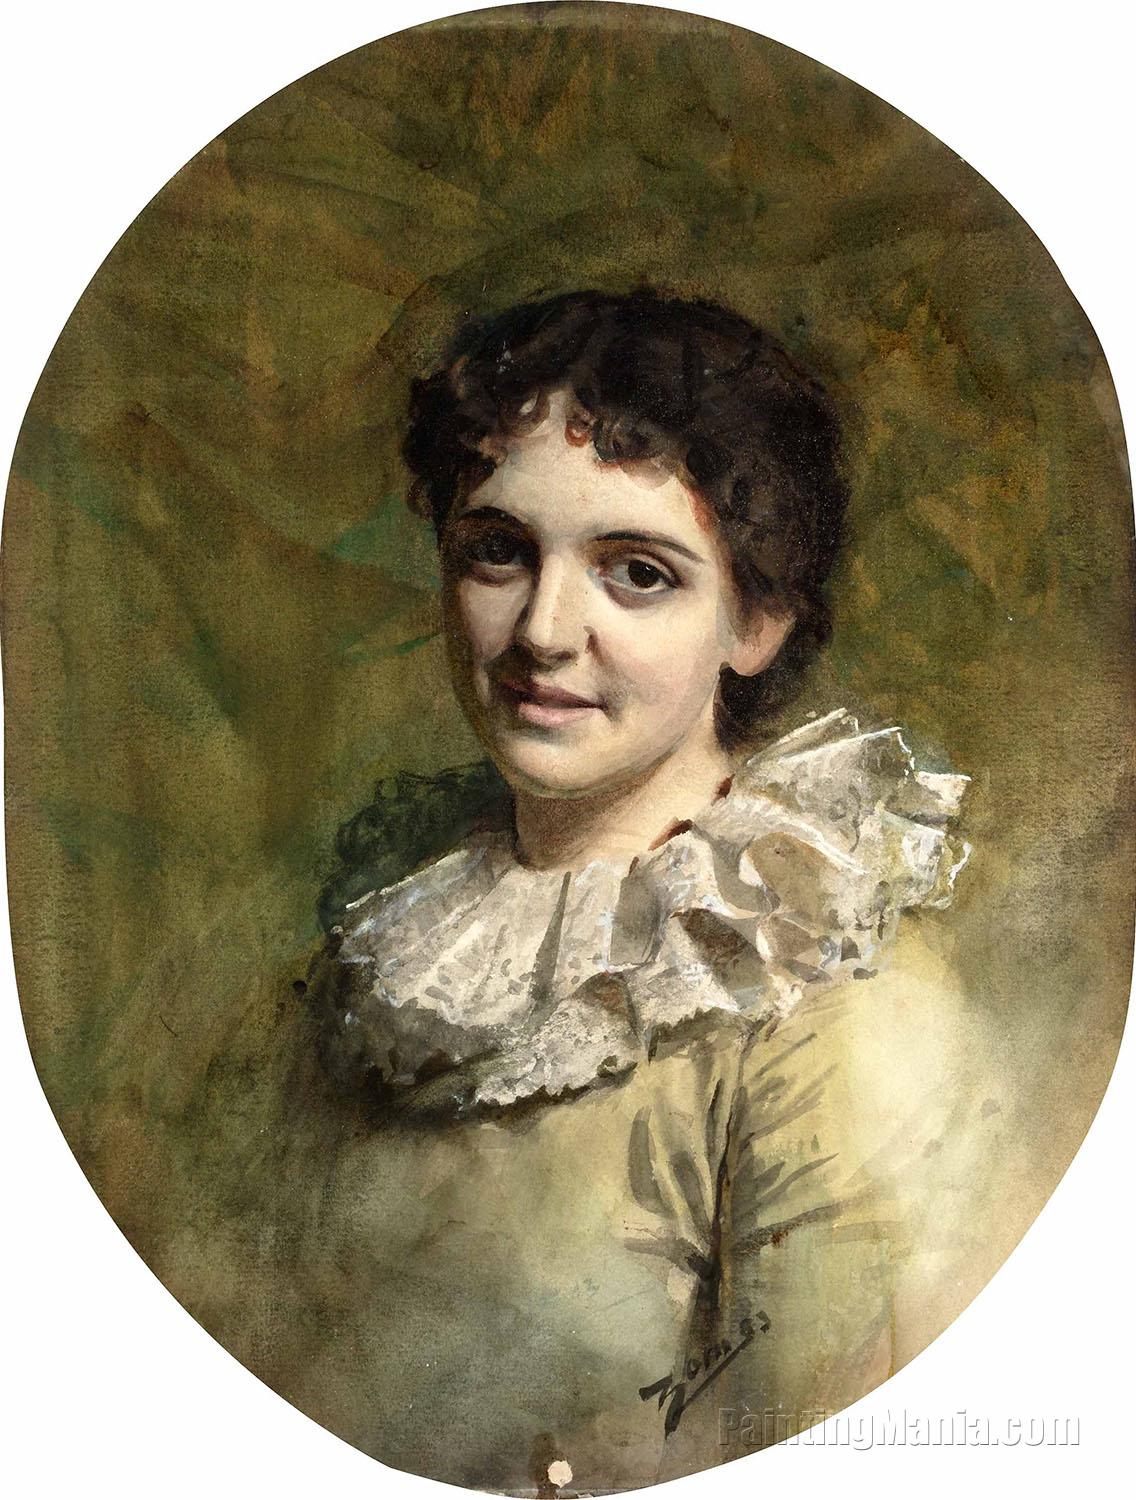 Kvinna med spetskrage (Woman with Lace Collar)